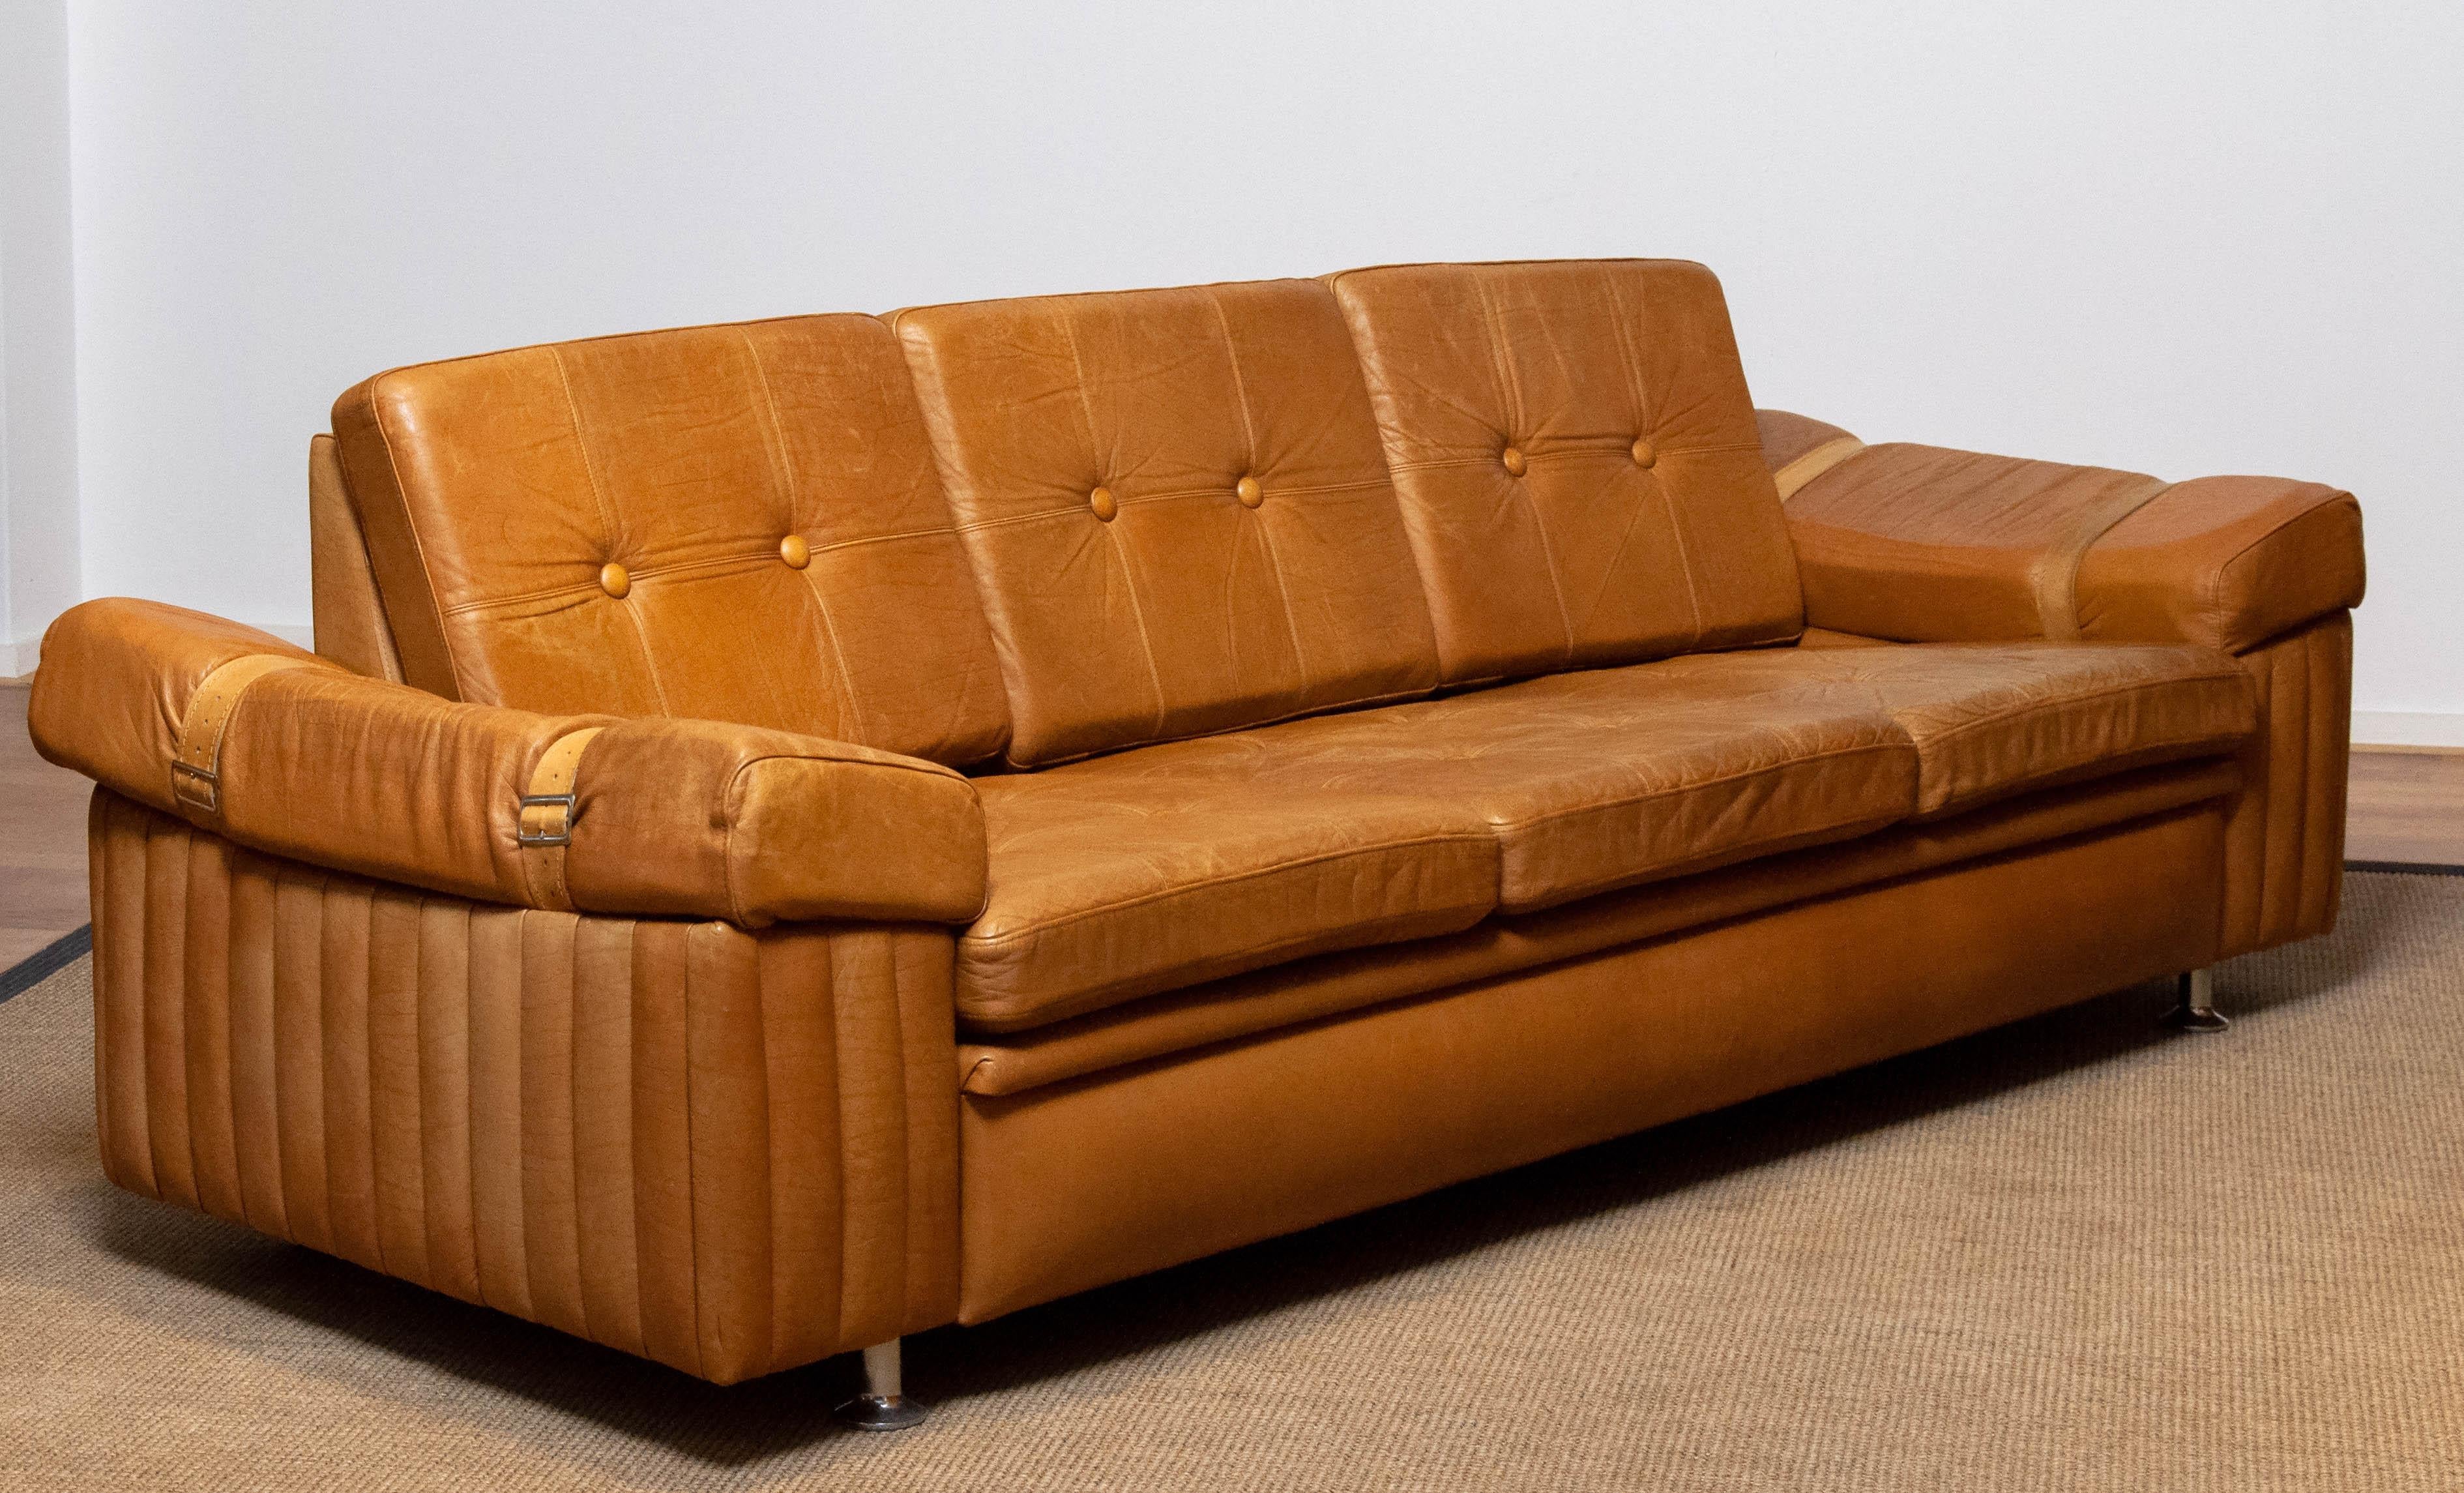 1970s Scandinavian Brutalist Three-Seater Low-Back Sofa in Camel Colored Leather For Sale 1